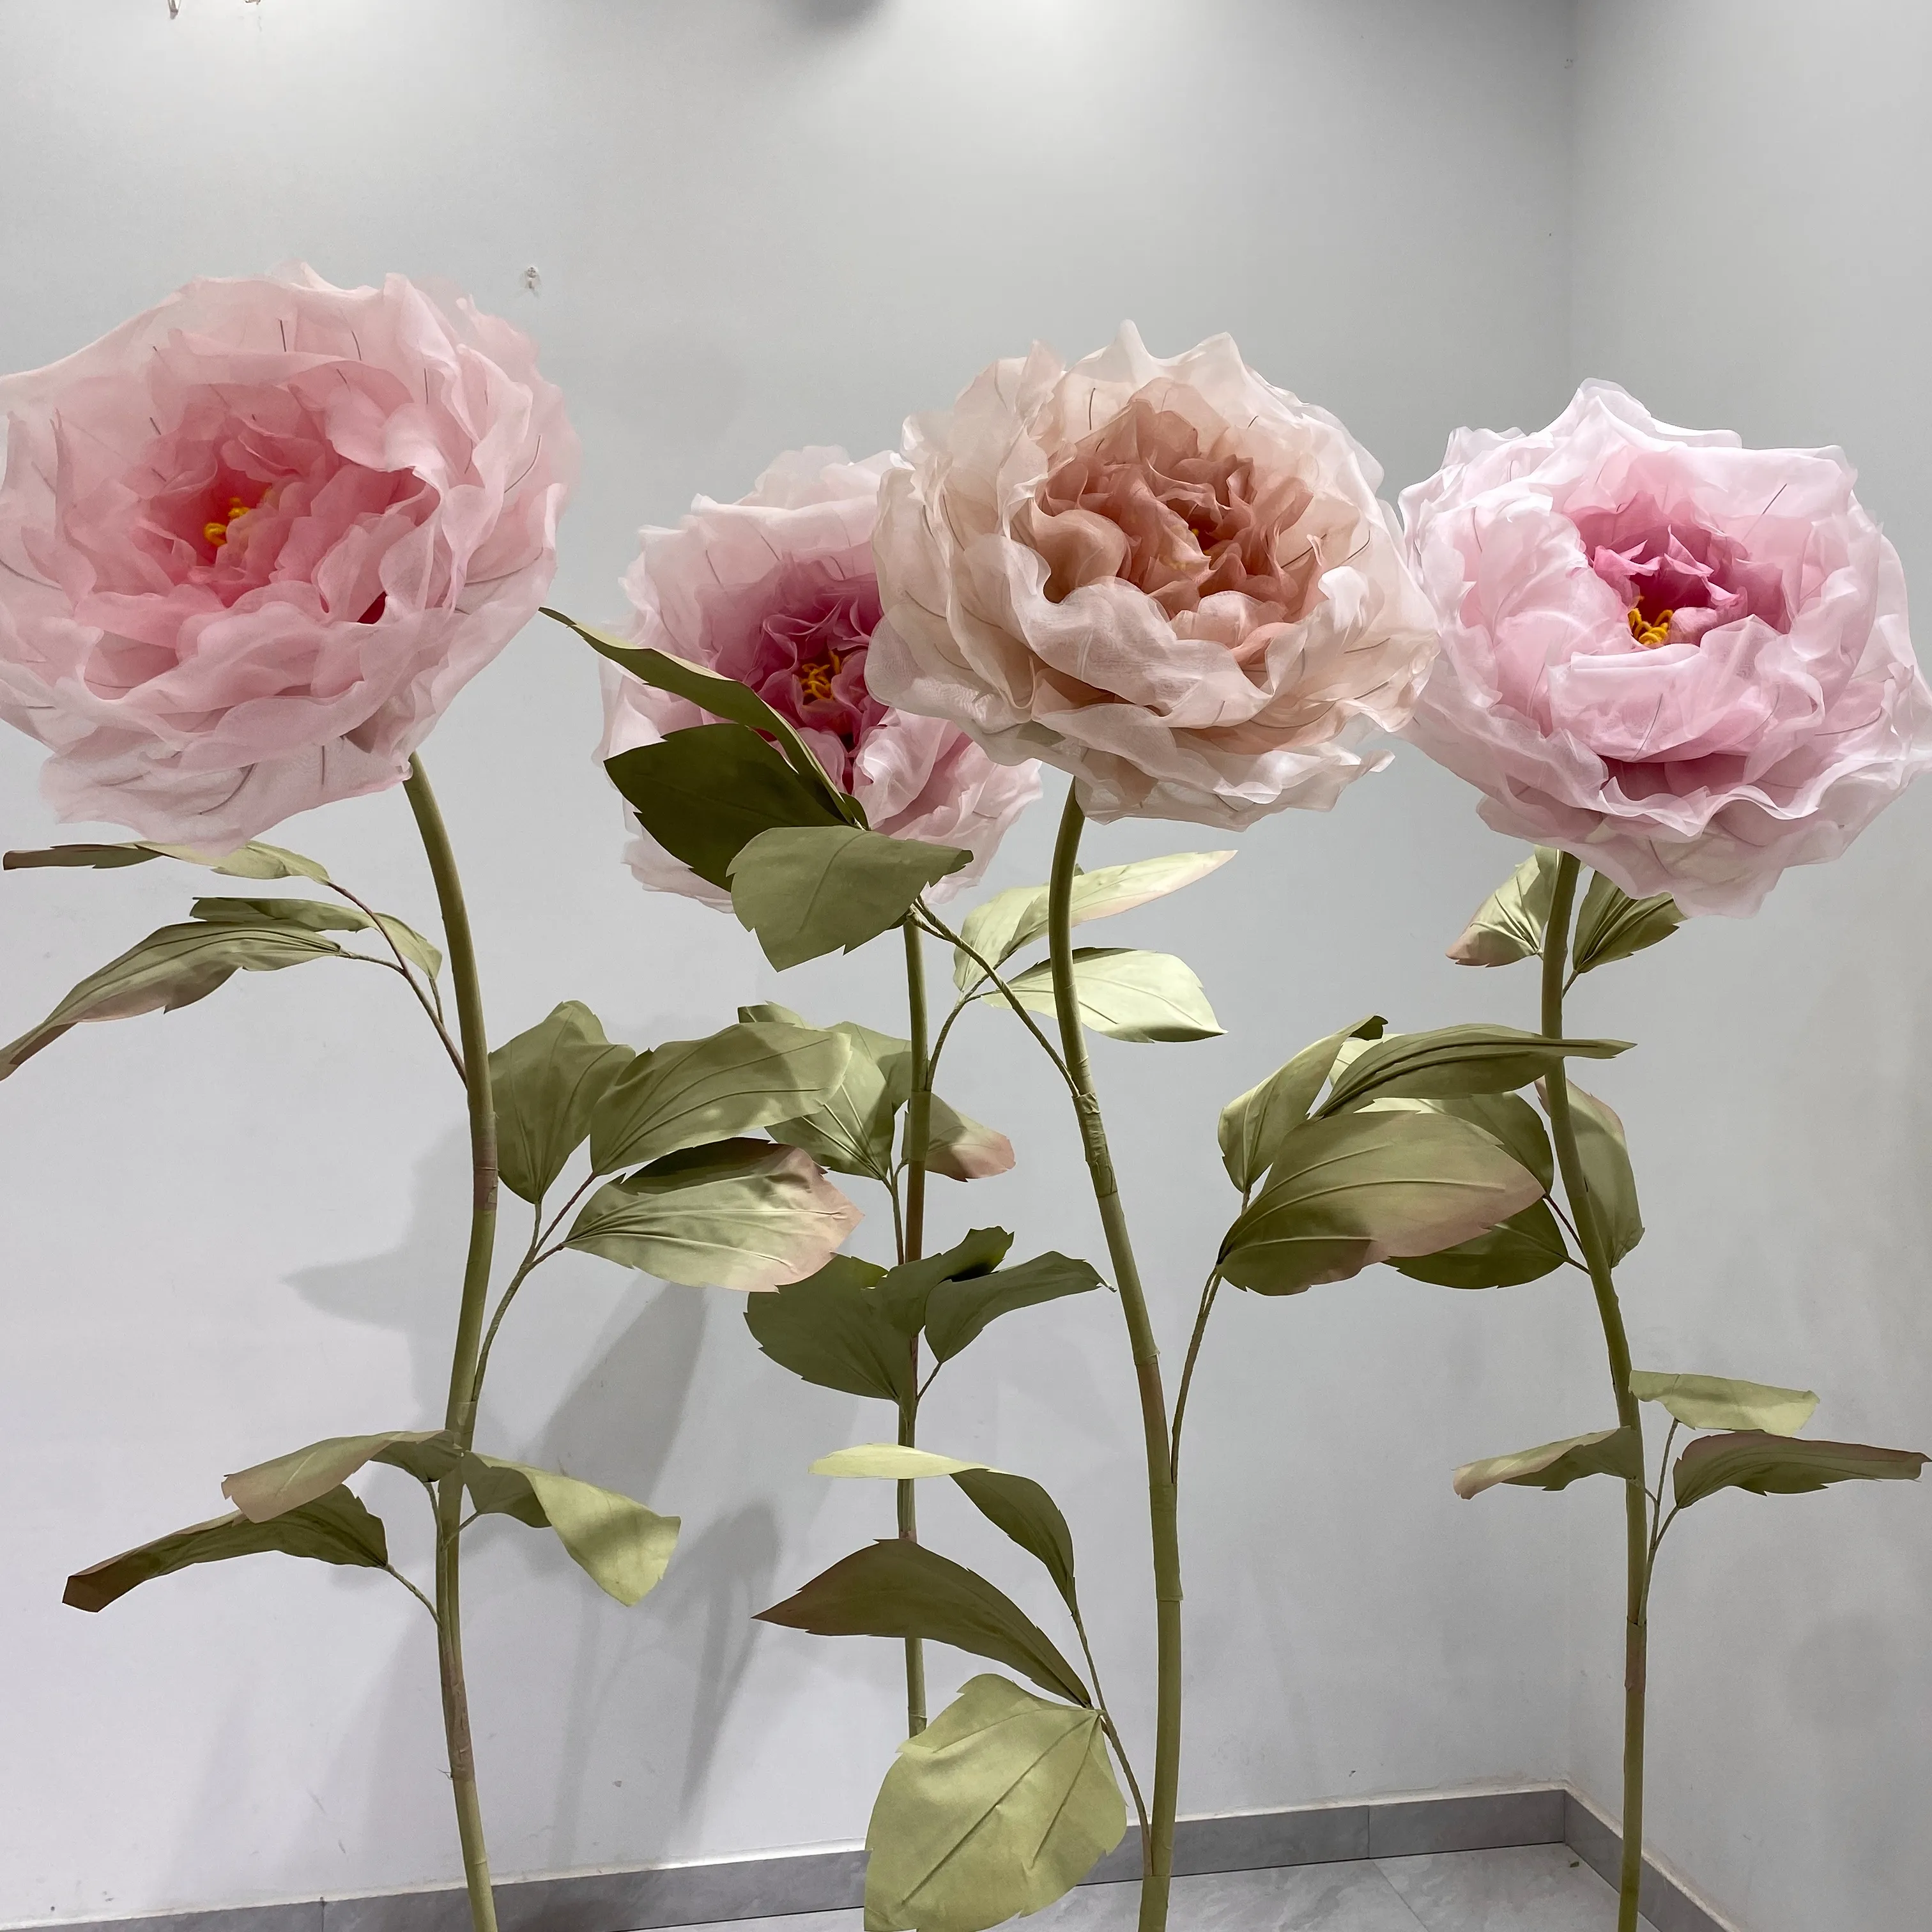 N-101 Giant peony poppy flowers with stem stand 30-100cm heads Big Huge giant Large flower decoration for Wedding Event